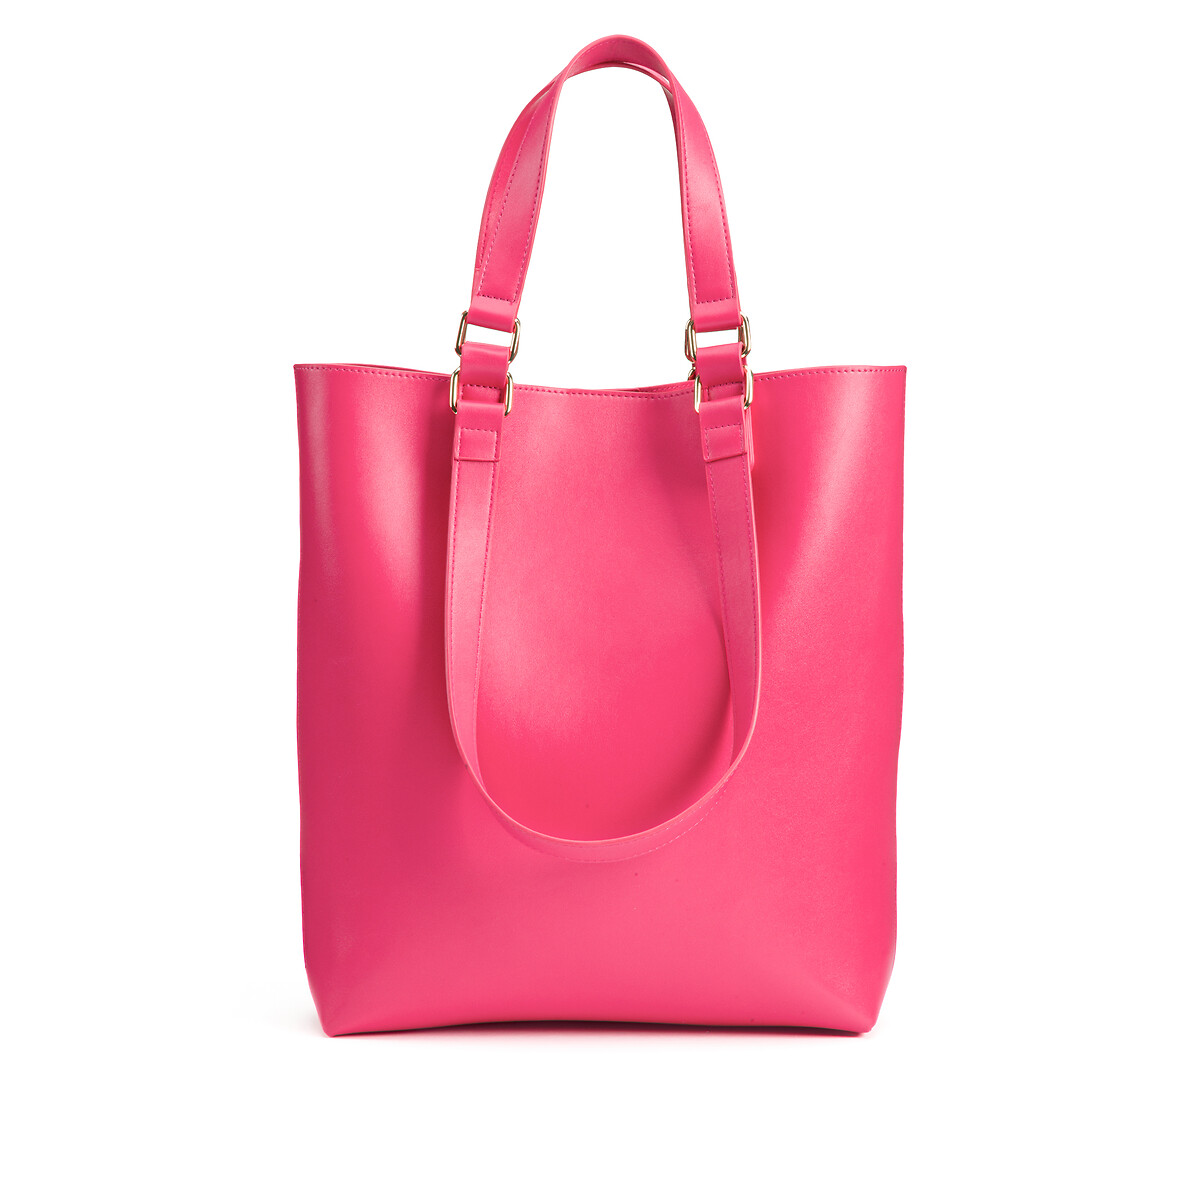 Recycled dual handle tote bag, pink, La Redoute Collections | La Redoute